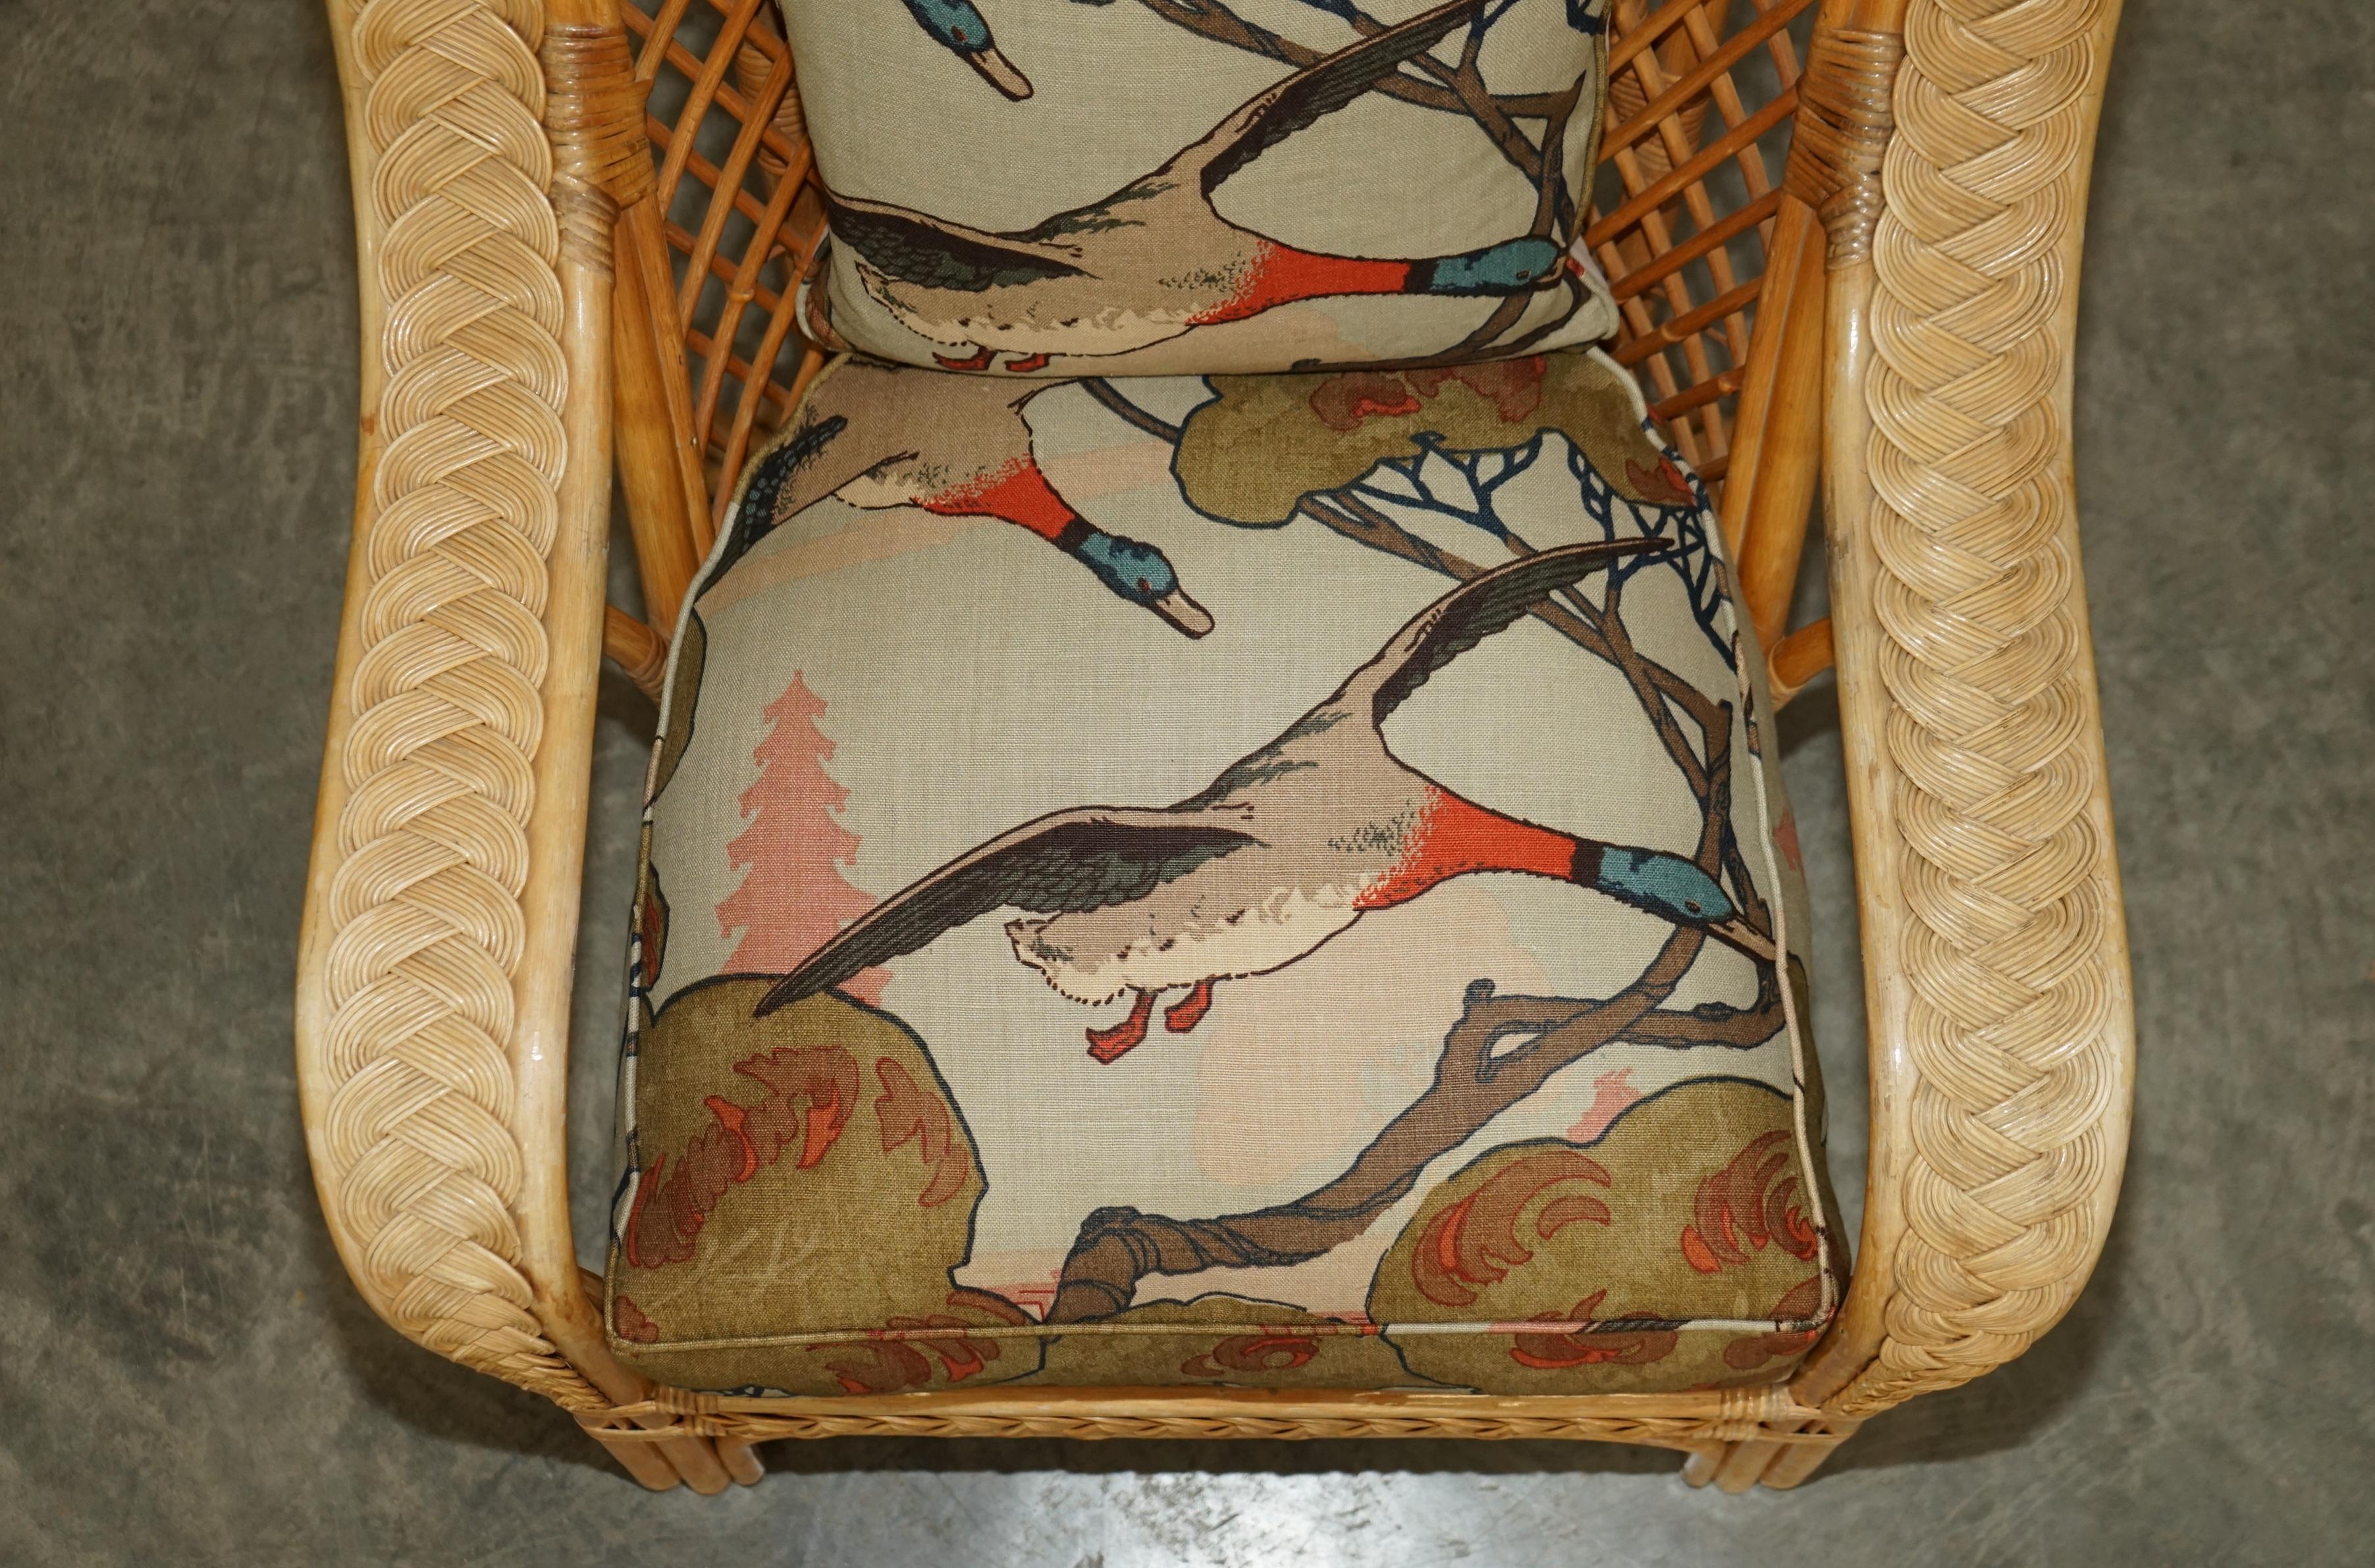 WICKER ARMCHAIRS STOOL TABLE SUITE UPHOLSTERED WiTH MULBERRY FLYING DUCKS FABRIC For Sale 7